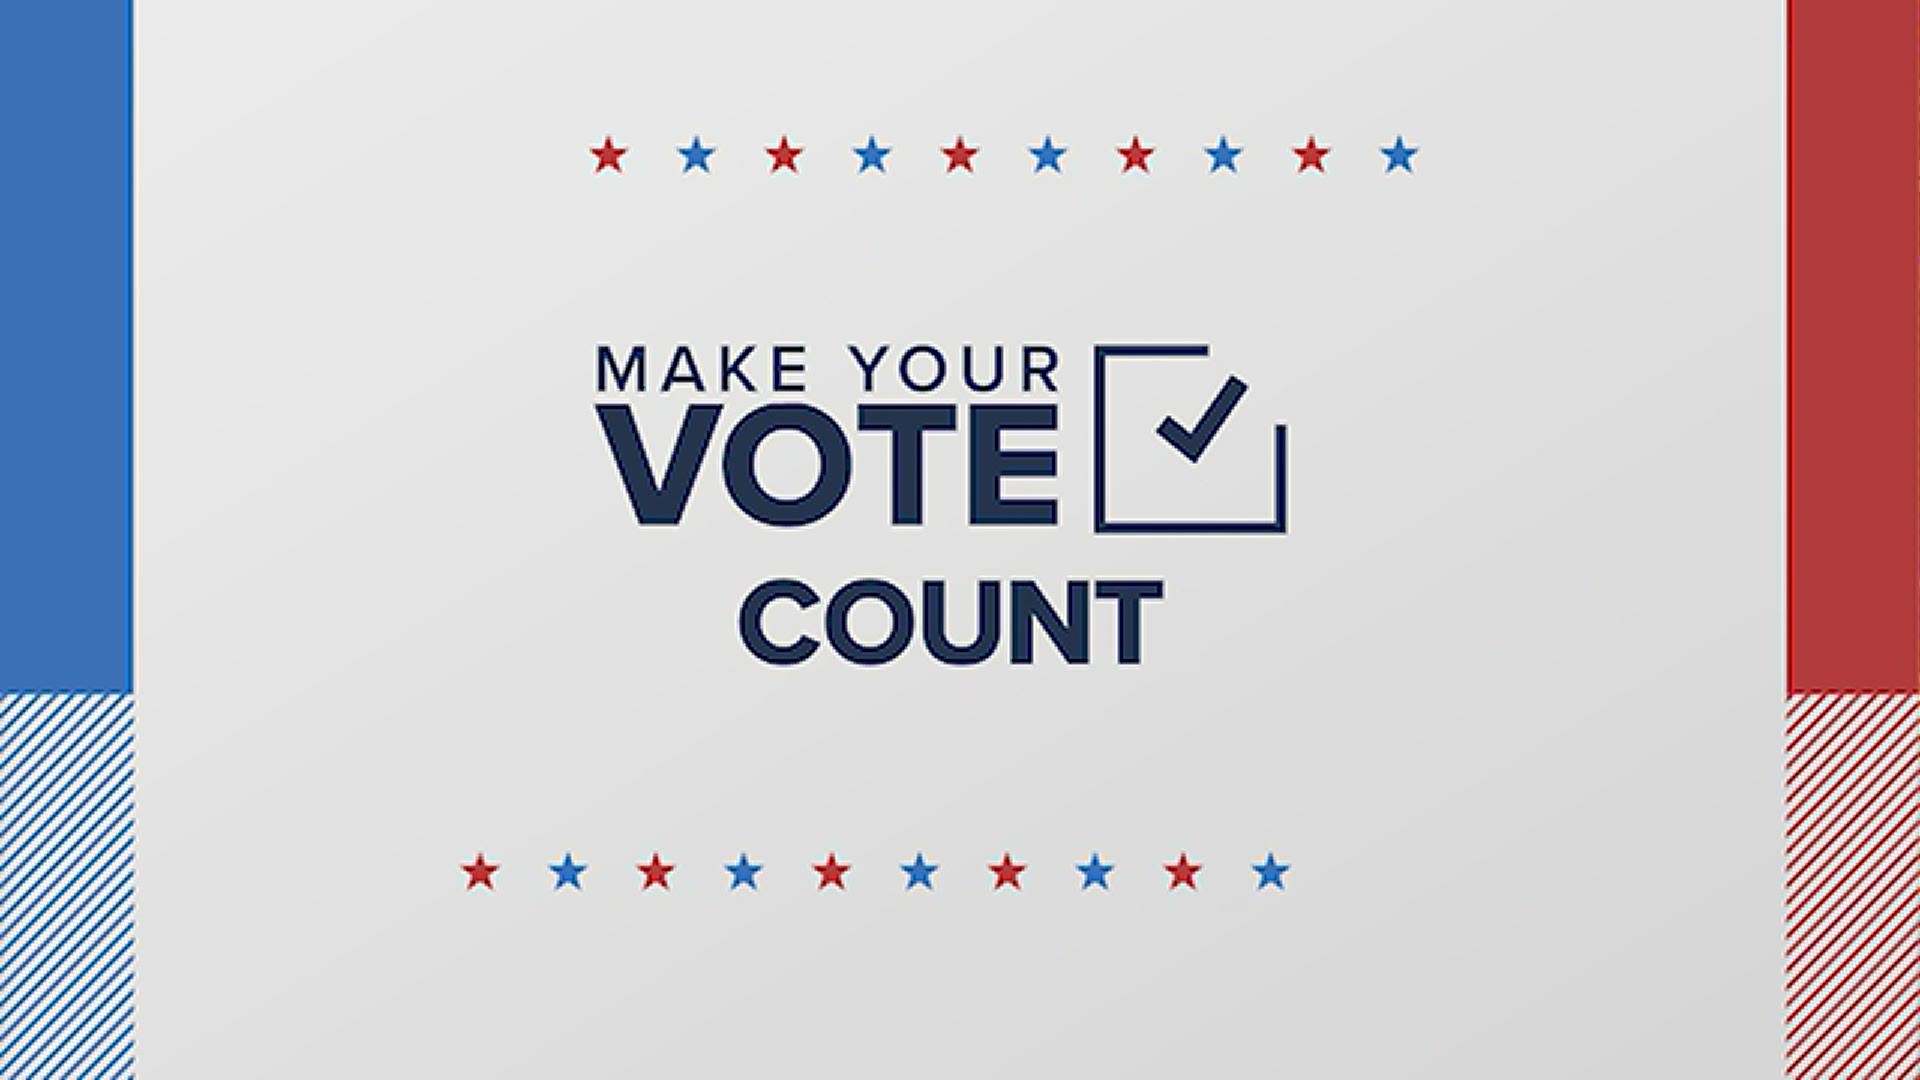 Many people in Alabama will be voting absentee this year, but others are headed to the polls. Whatever you choose, here's information on how to make your vote count.